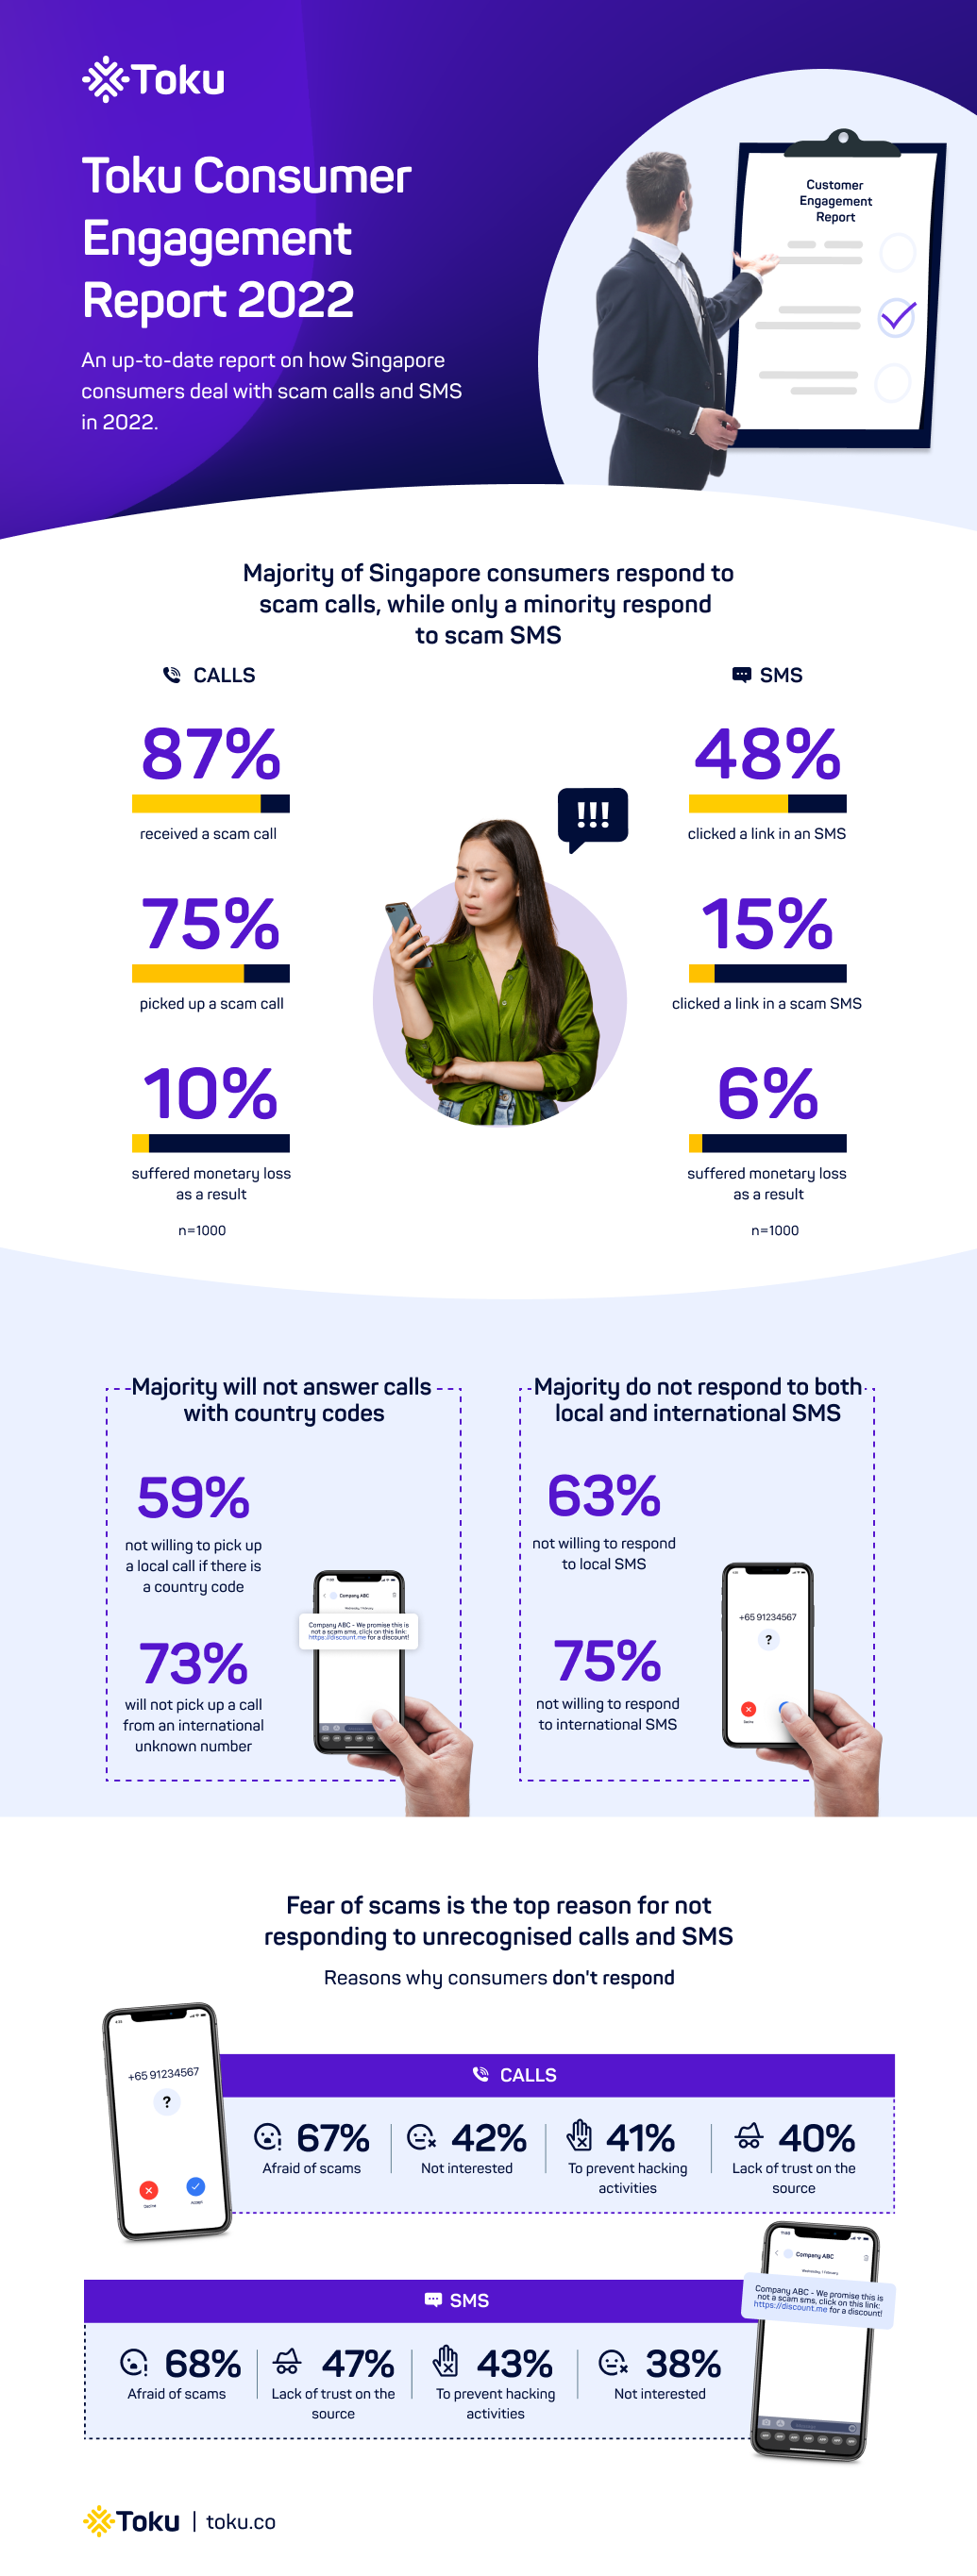 Toku Consumer Engagement Report 2022 infographic